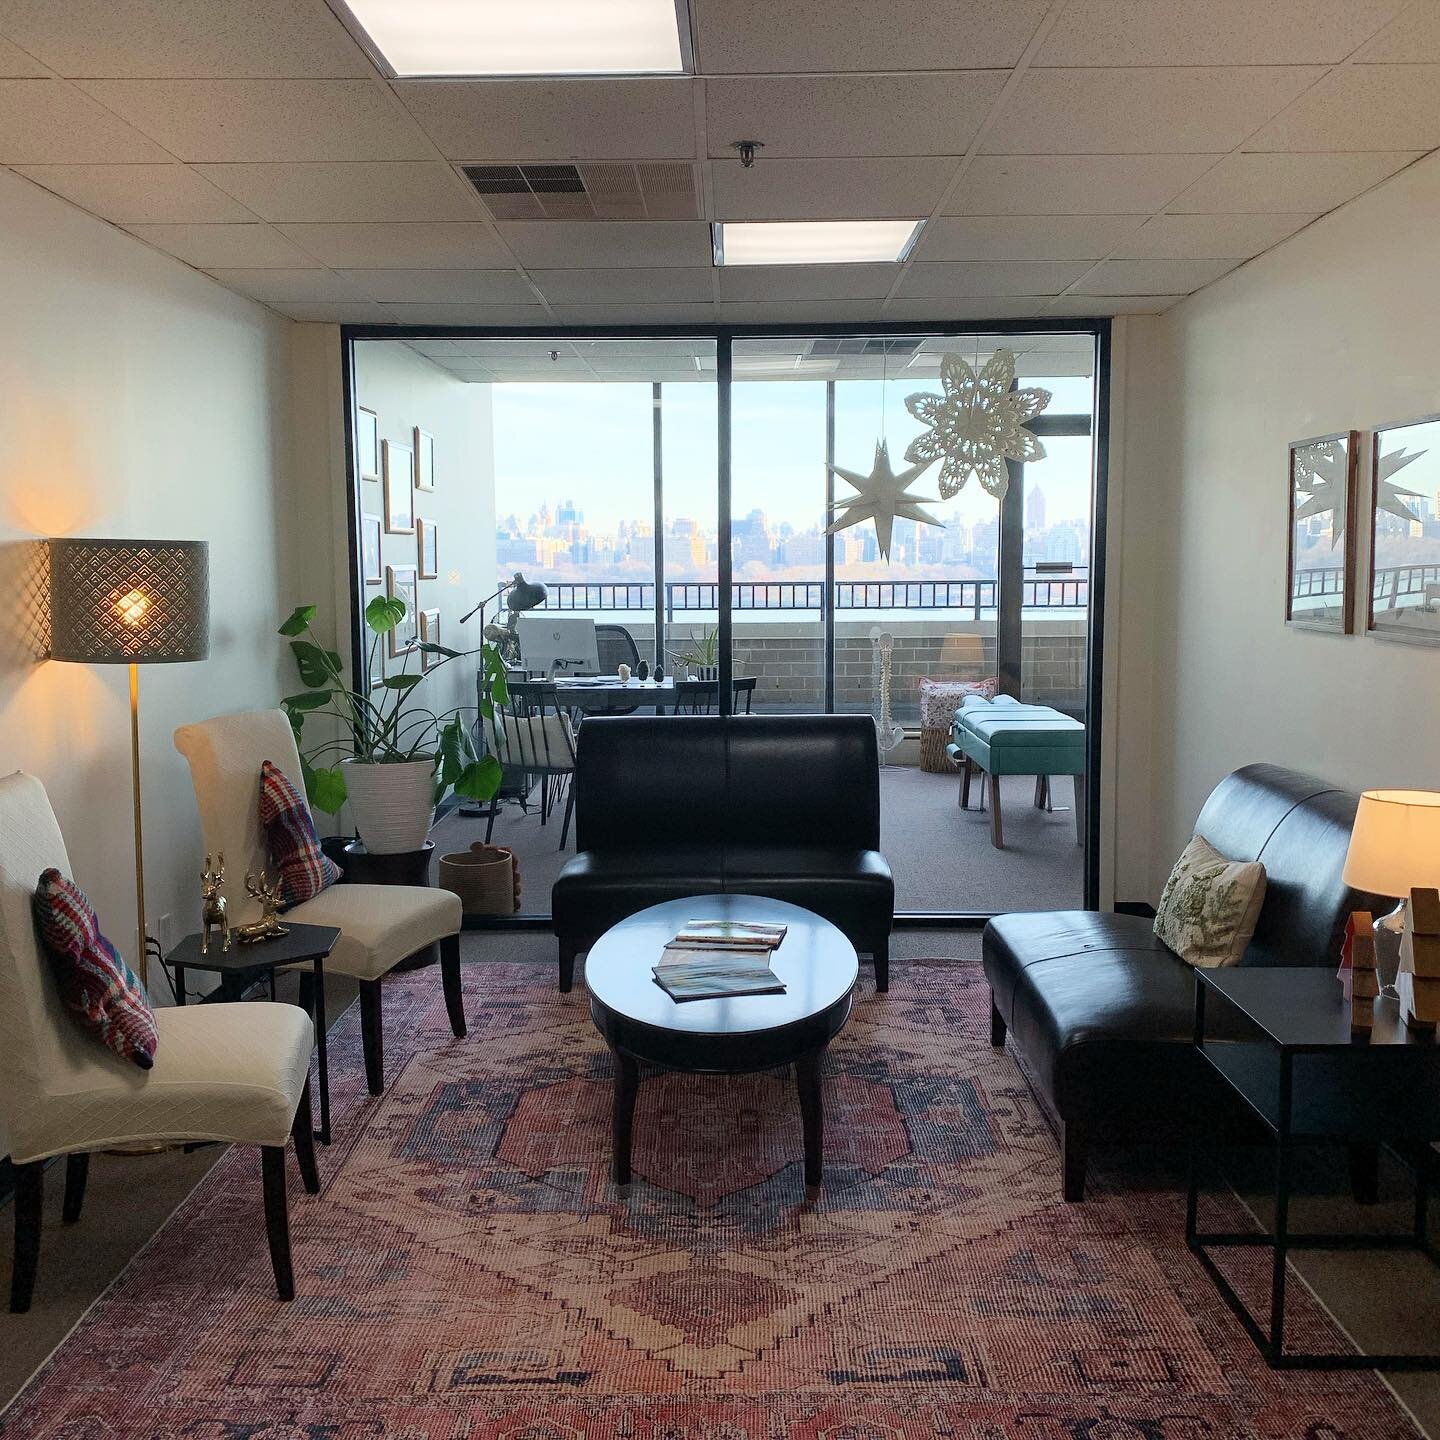 It&rsquo;s a beautiful day in Guttenberg! Dr Kathryn is in the office all day and hopes to see some of you! Call 201-305-3591 or go online to schedule an appointment